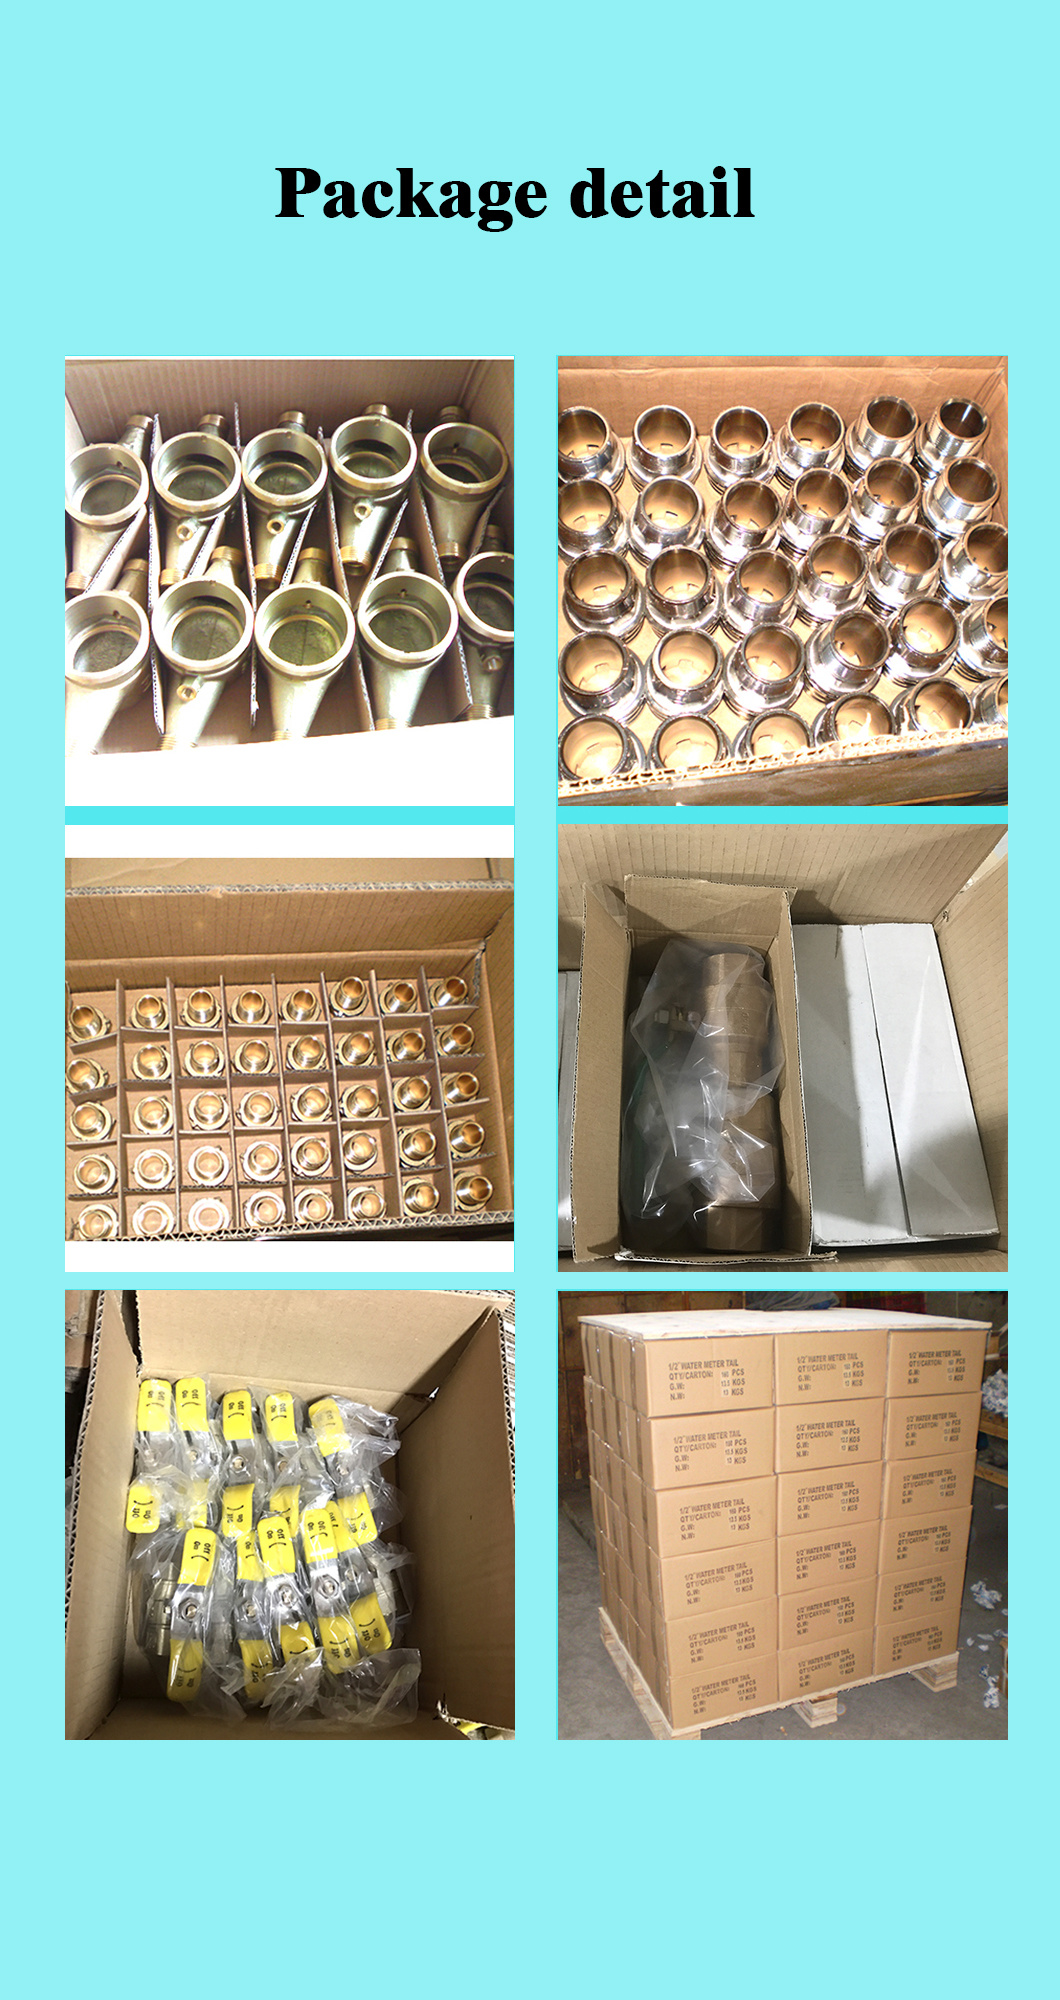 Forging Plated Nickel Brass PPR Fitting Female Inserts